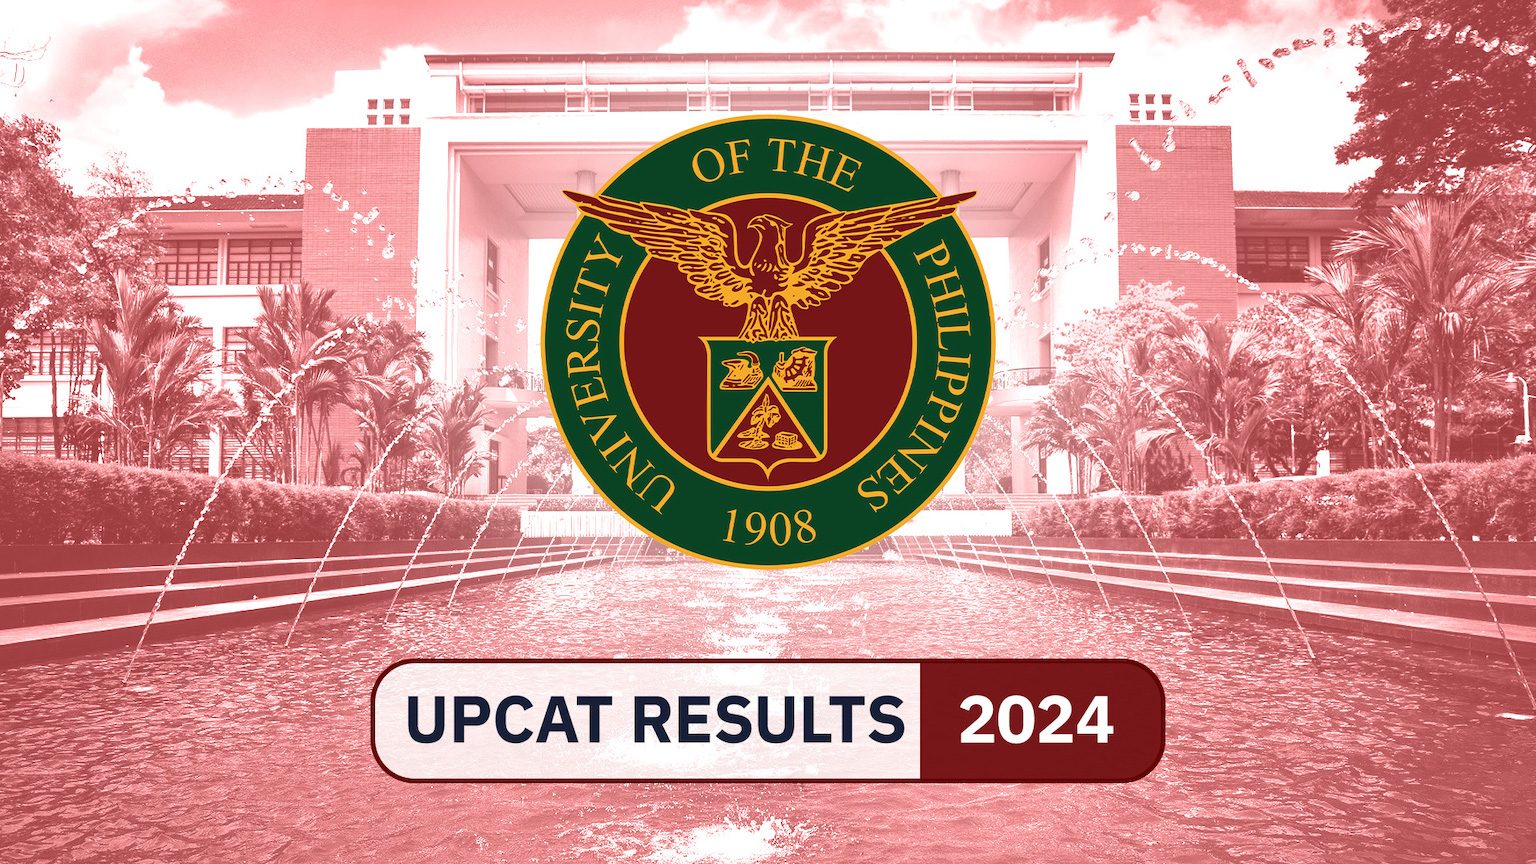 UP 2024 college admission results are out